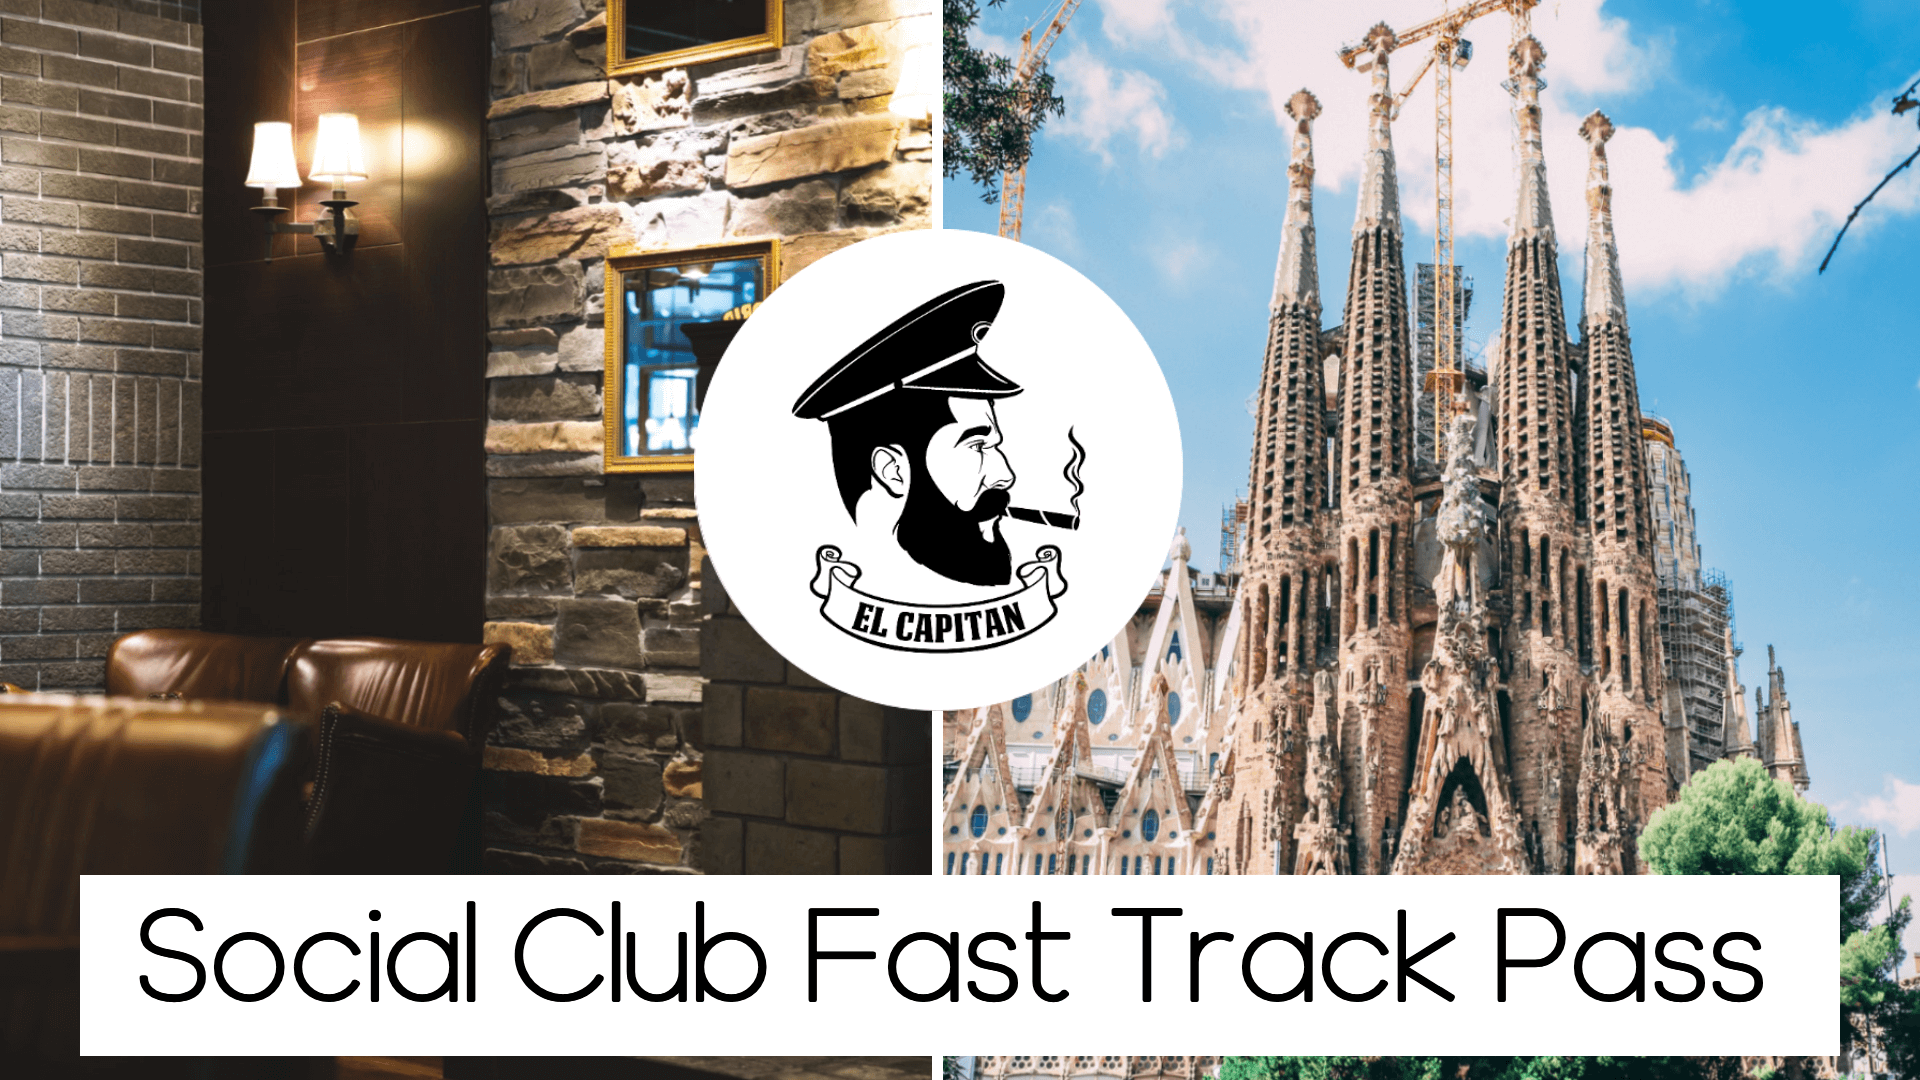 Barcelona Social Club Fast Track Pass Explained